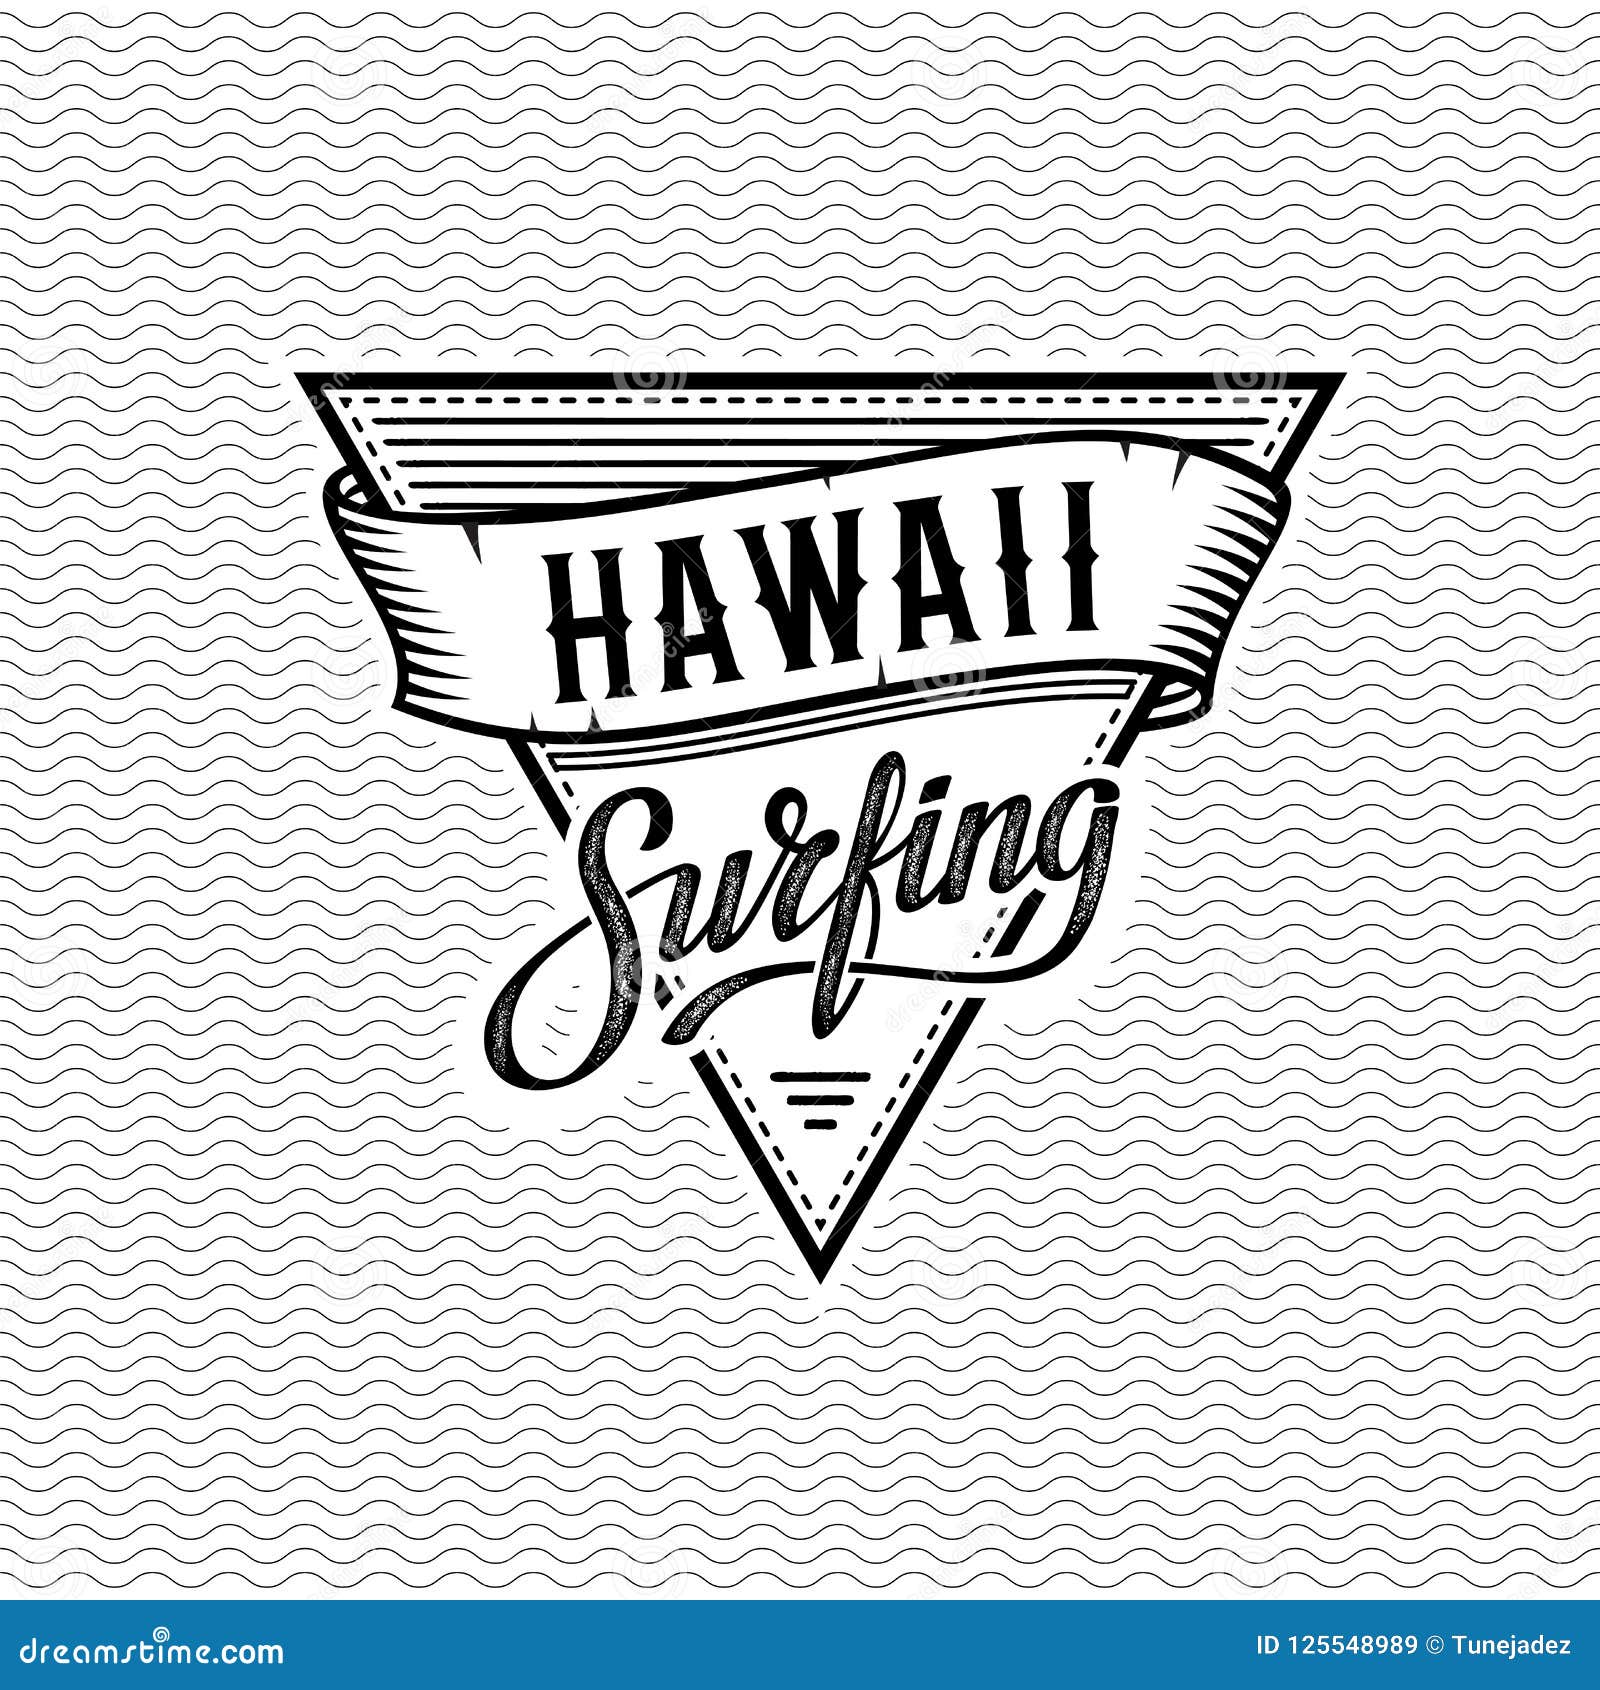 Hawaii Surfing Black and White. Vector Illustration Stock Vector ...